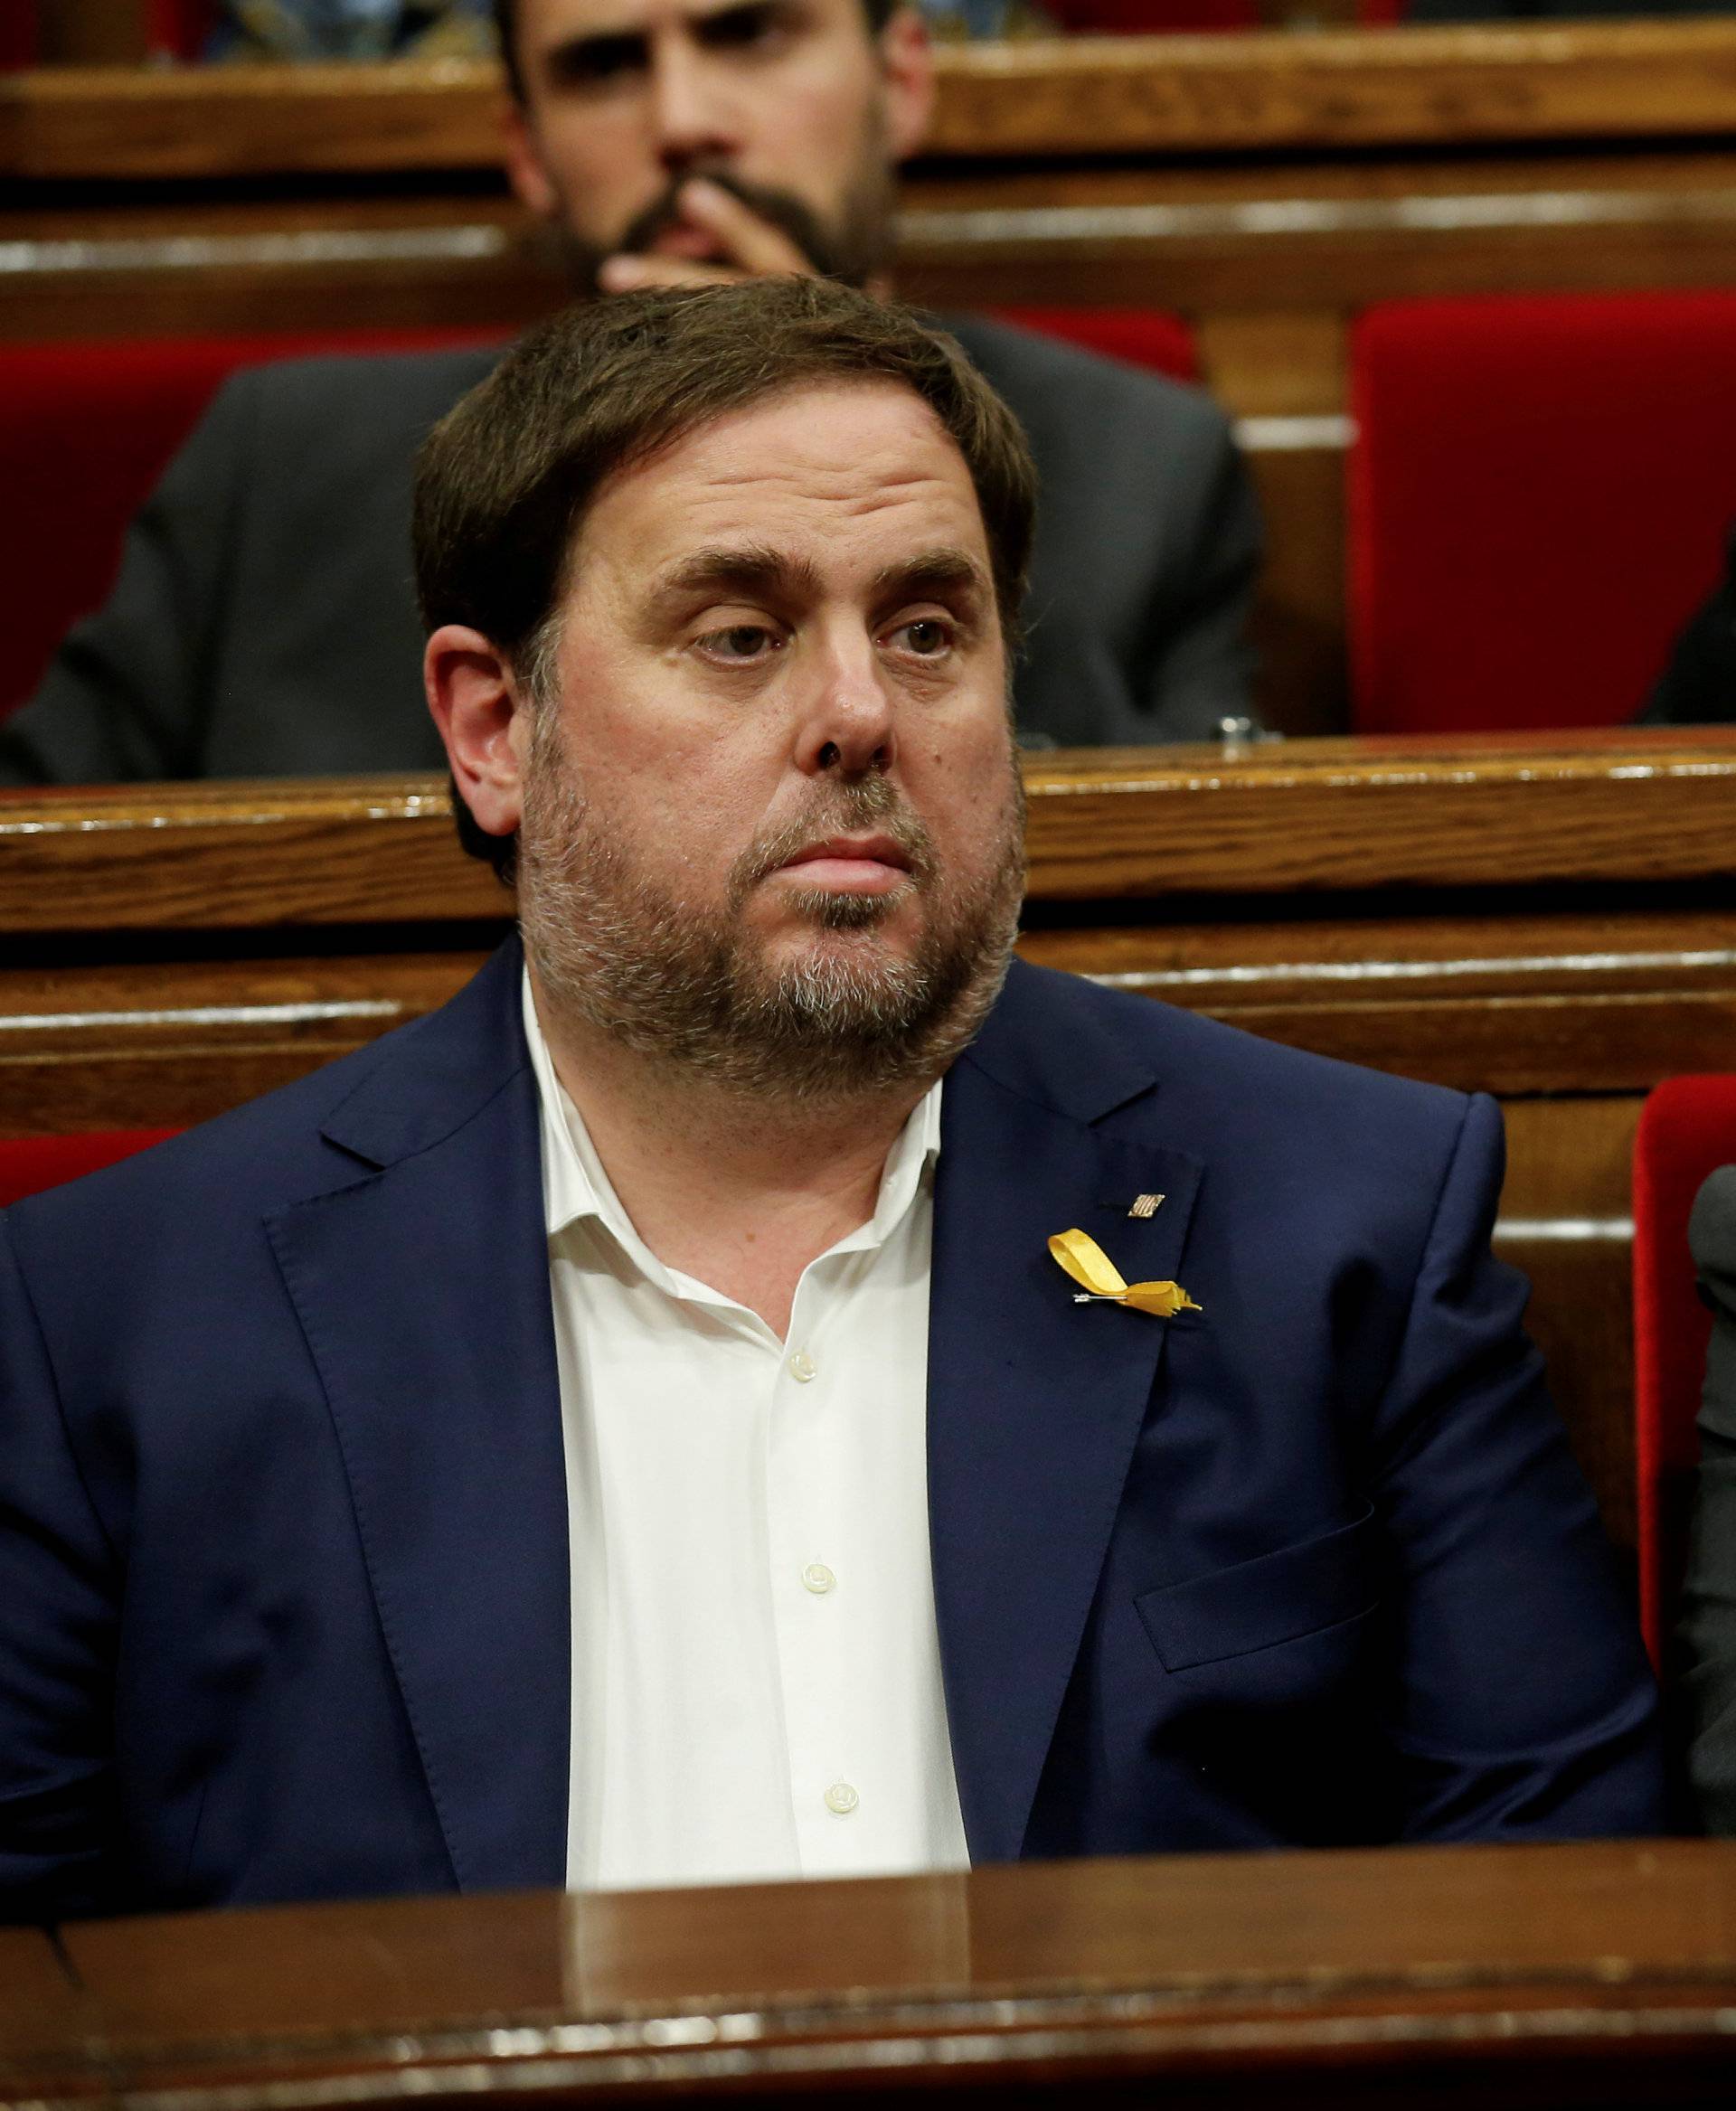 FILE PHOTO: Catalan President Puigdemont talks to Catalan Vice President Junqueras at the start of a session at the Catalan regional Parliament in Barcelona